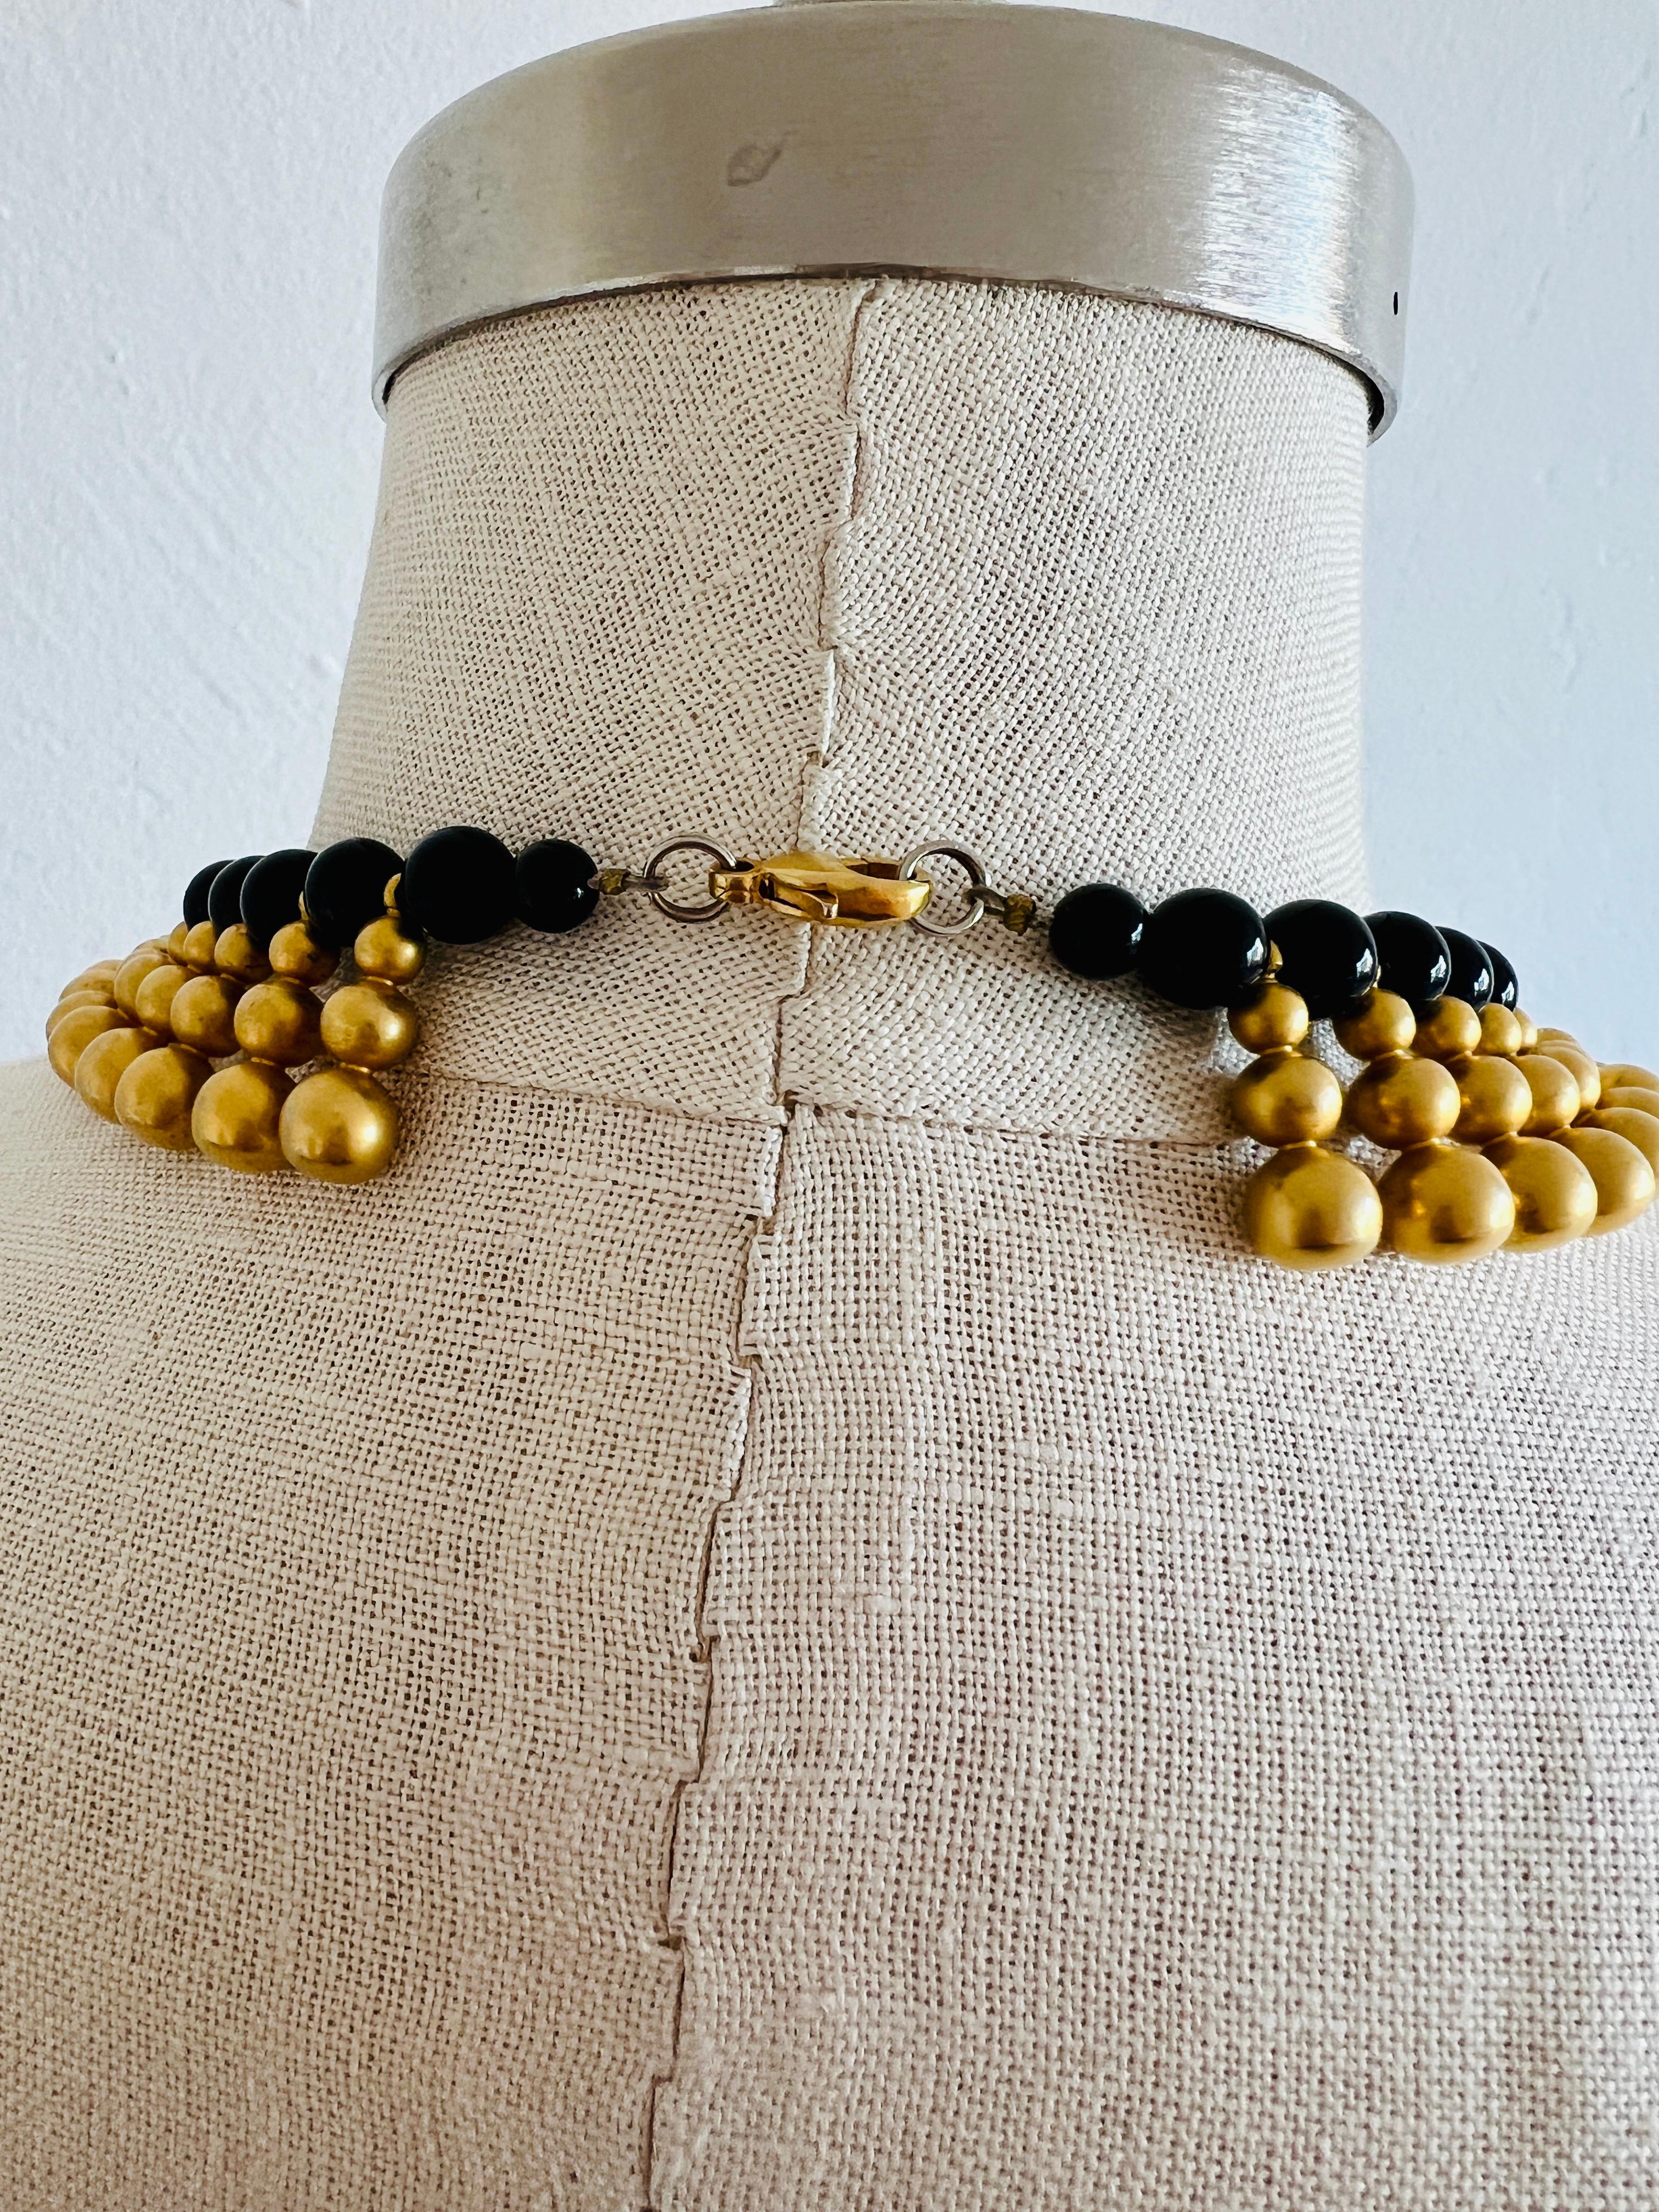 black thread with gold beads